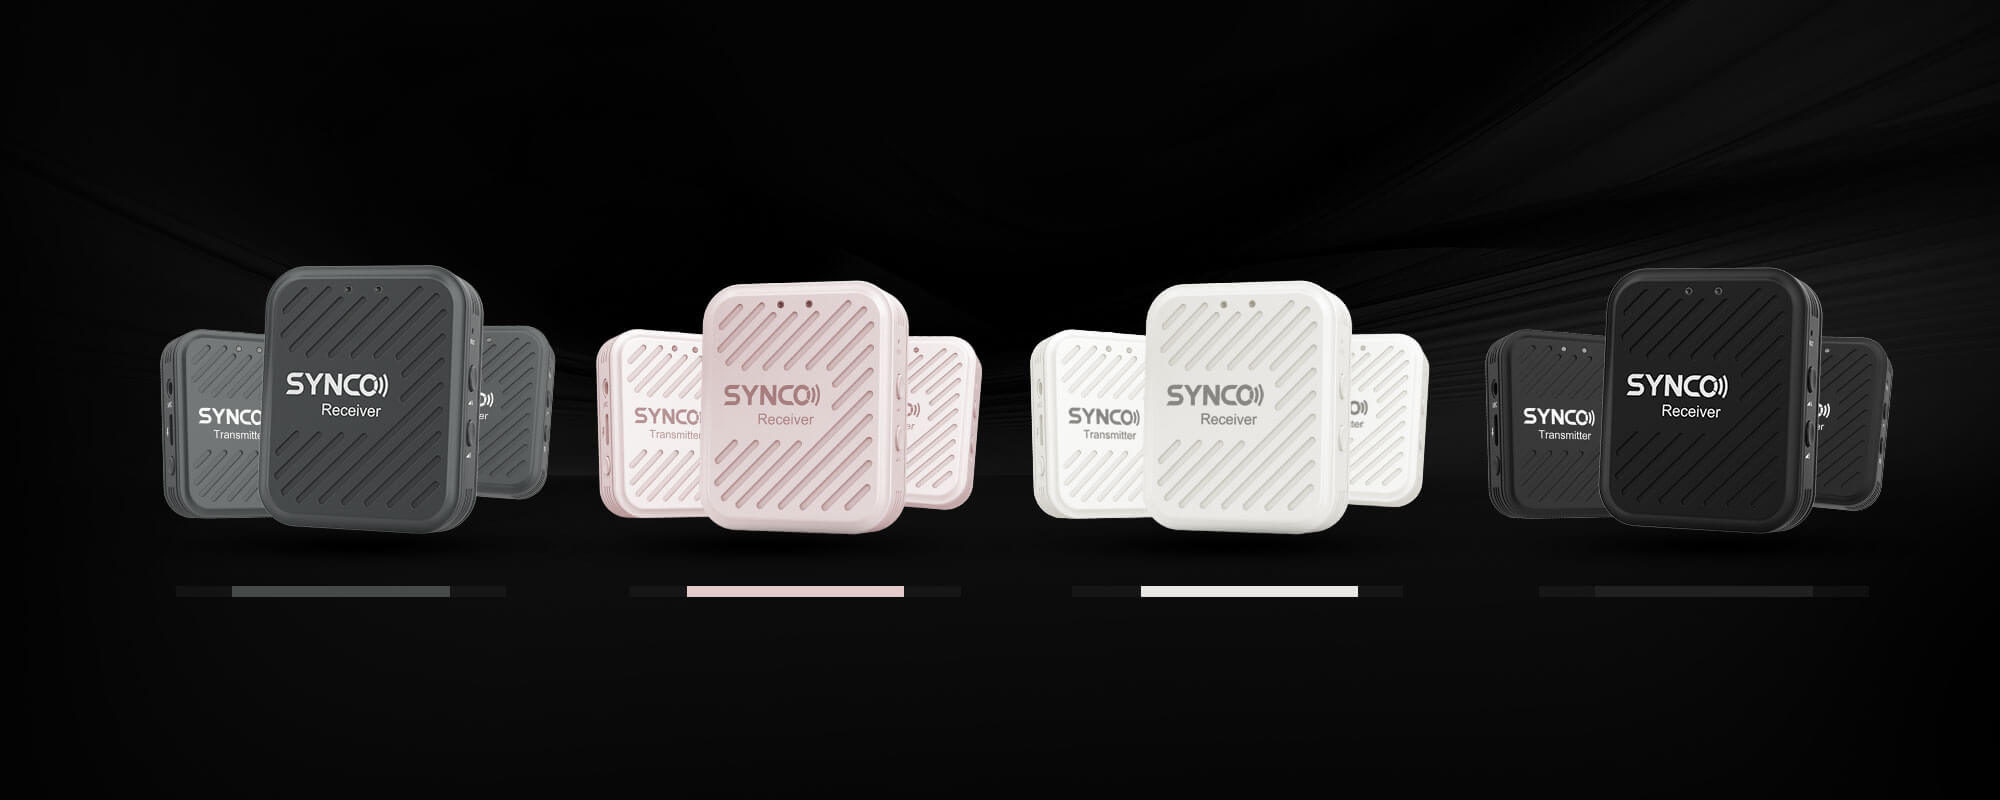 SYNCO G1(A2) comes in four colors, including Onyx Black, Peach Pink, Porcelain Grey, and Pearl White.